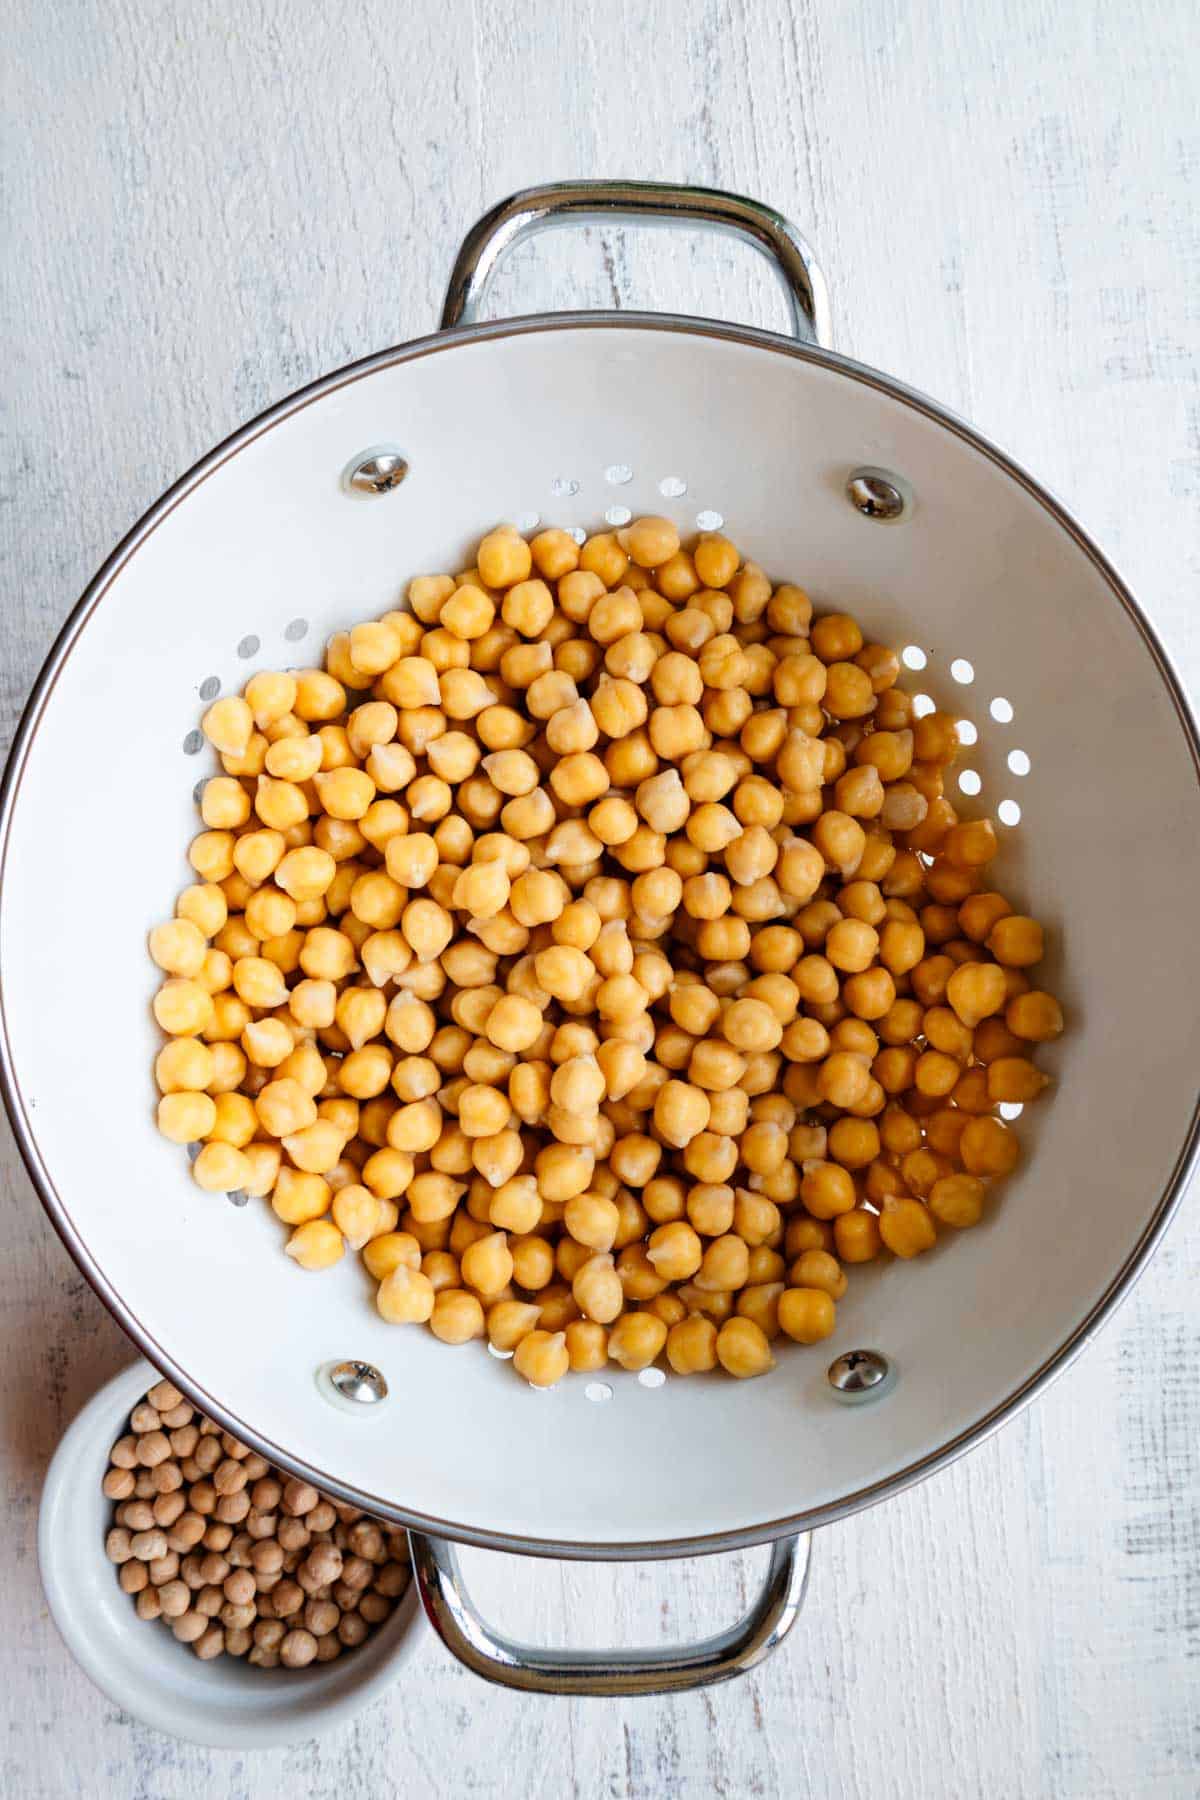 Soaked and drained chickpeas in a white colander beside a white bowl of dried chickpeas.